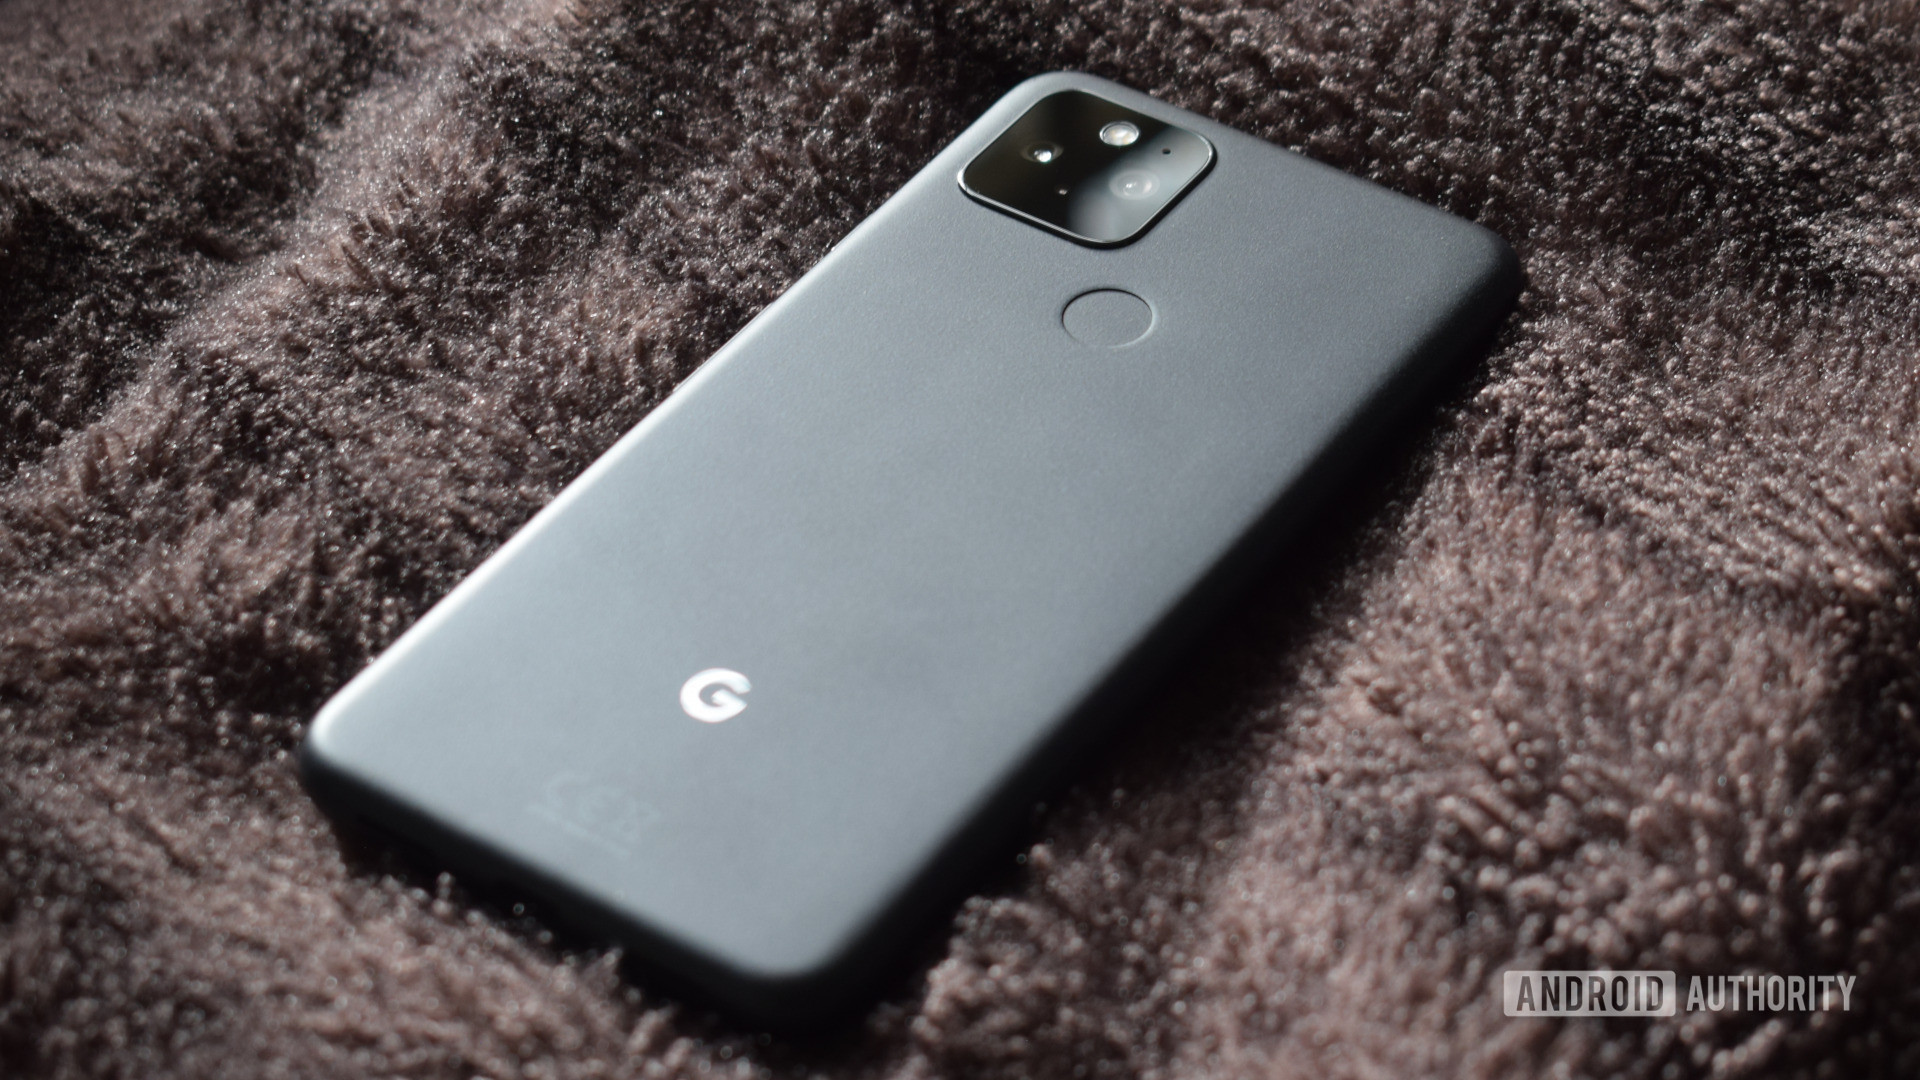 Google Pixel 5 Grey showing the back of the phone and the Google logo